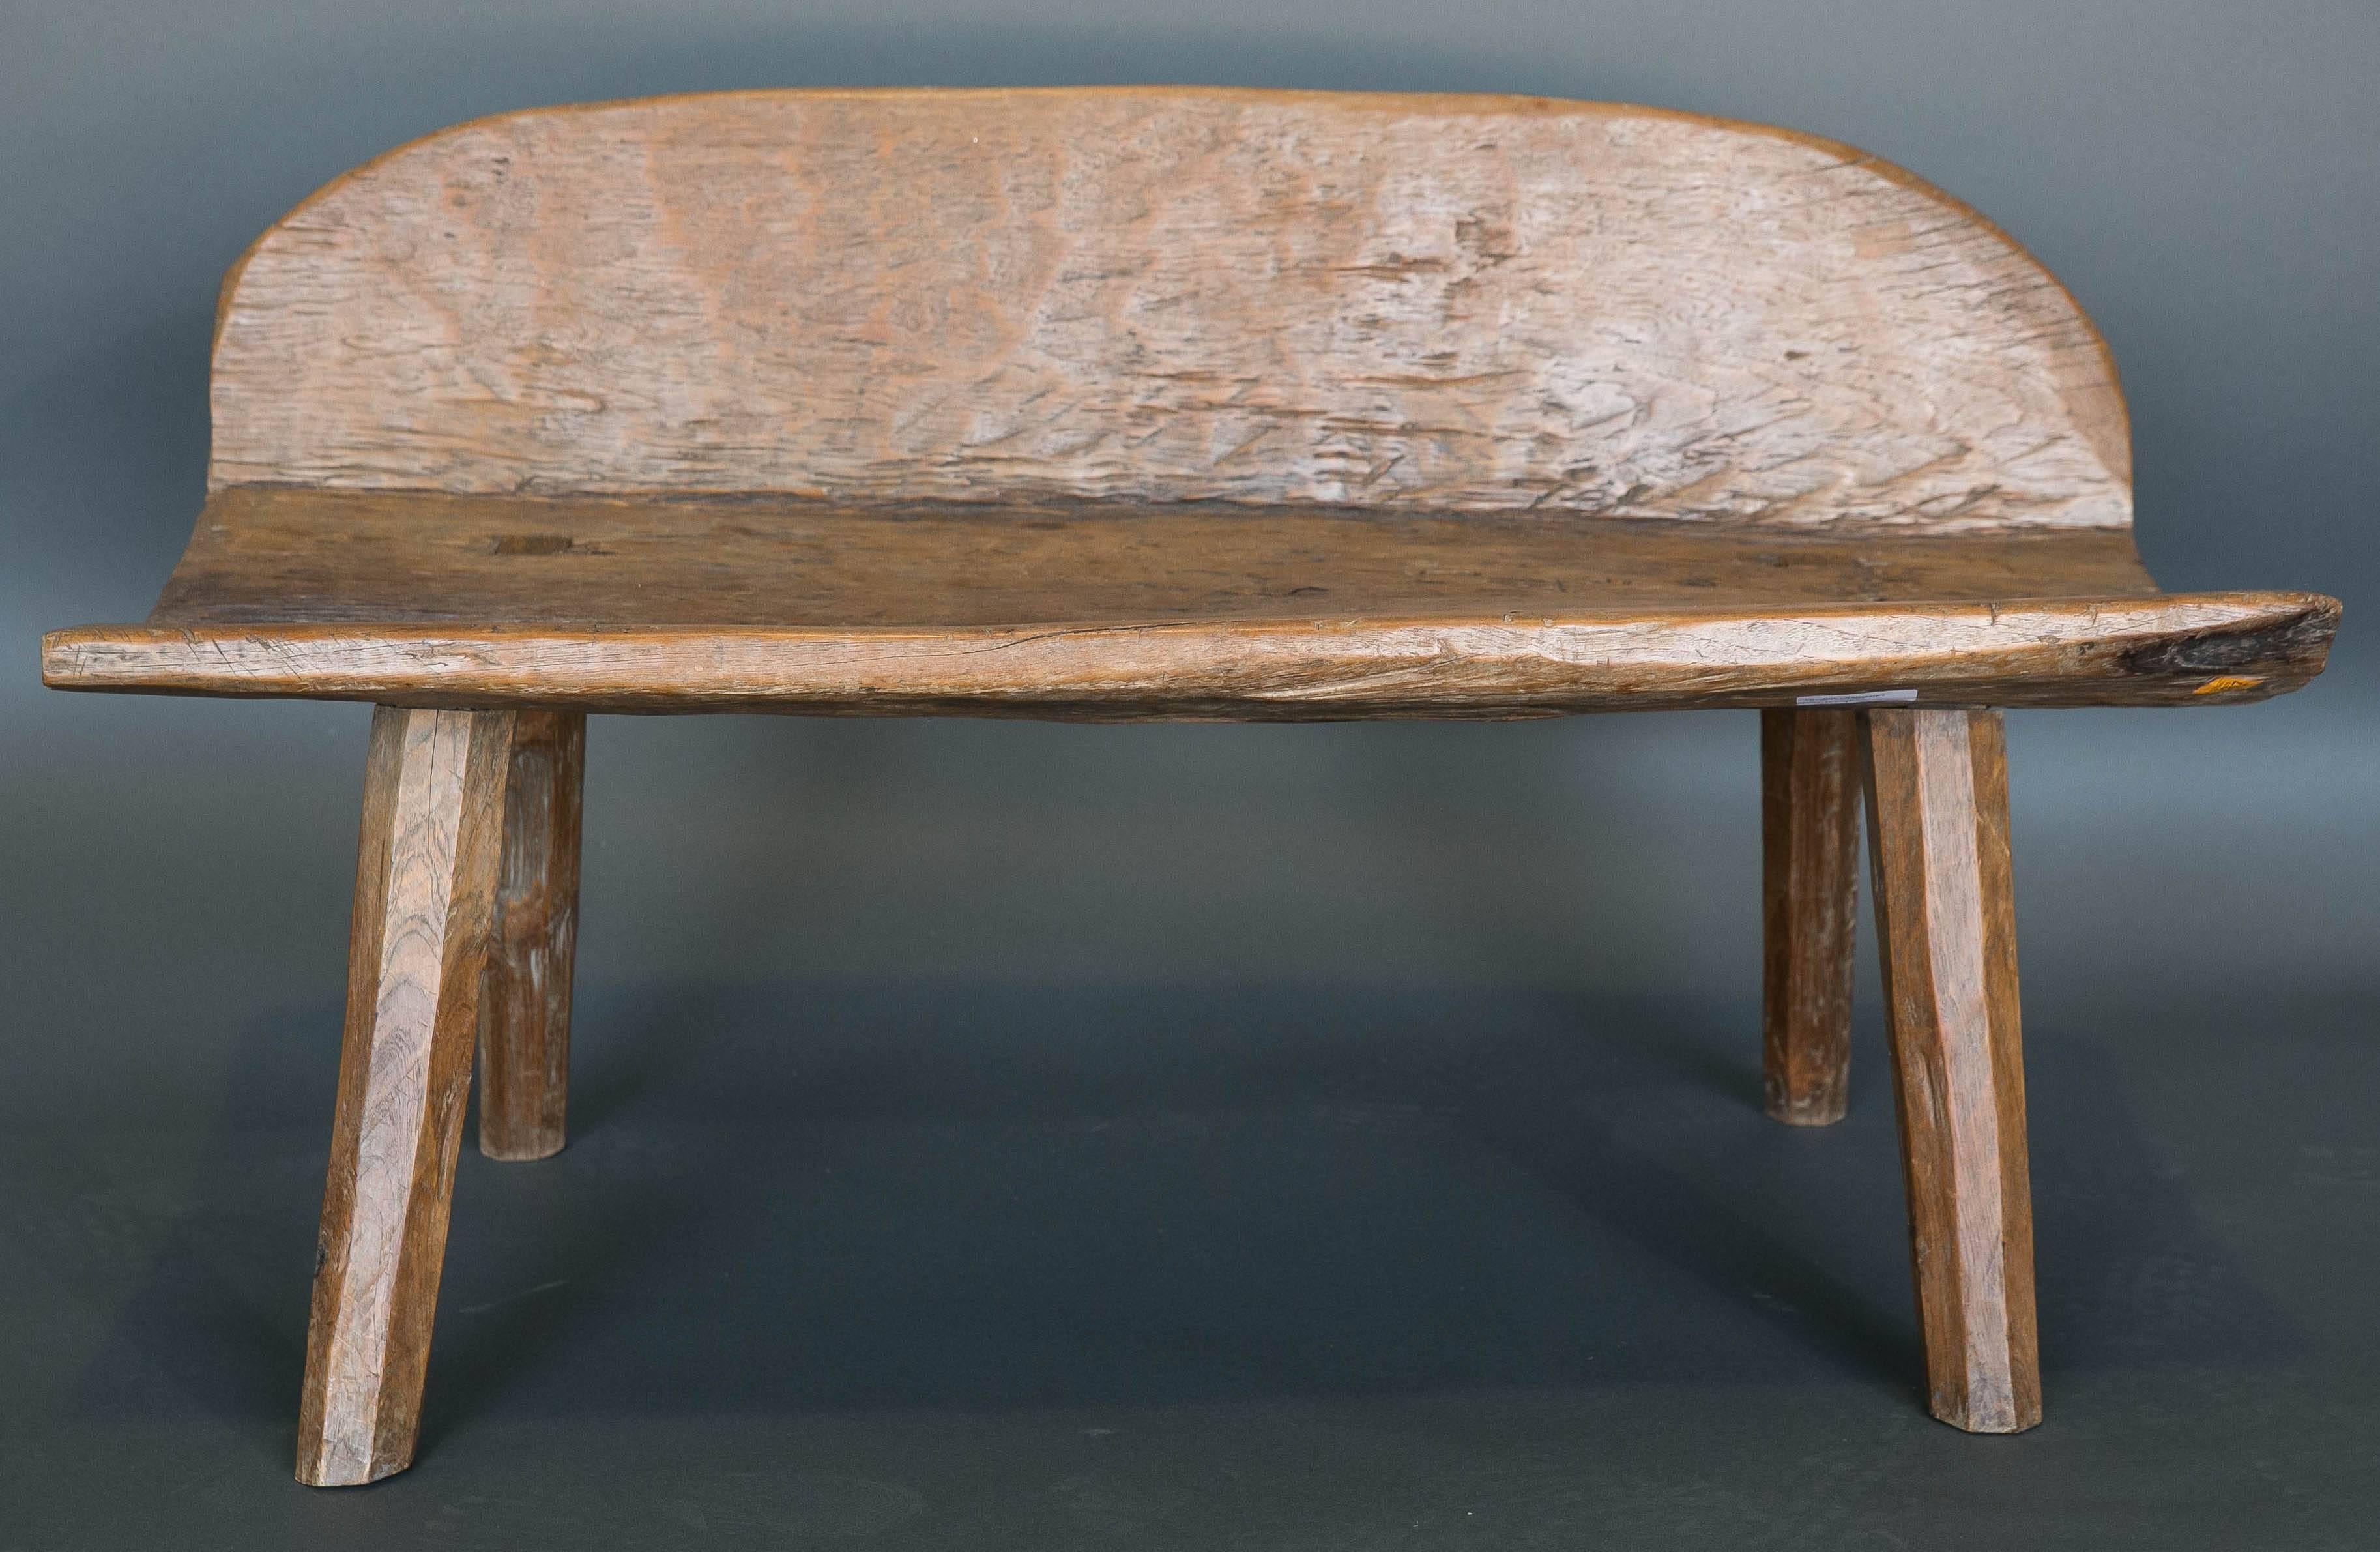 18th century bench from Spanish Pyrenees made from a single dugout trunk. The seat and the back are a solid piece. Beautiful Primitive piece of Folk Art. Made from a chestnut trunk. Seat height is 18